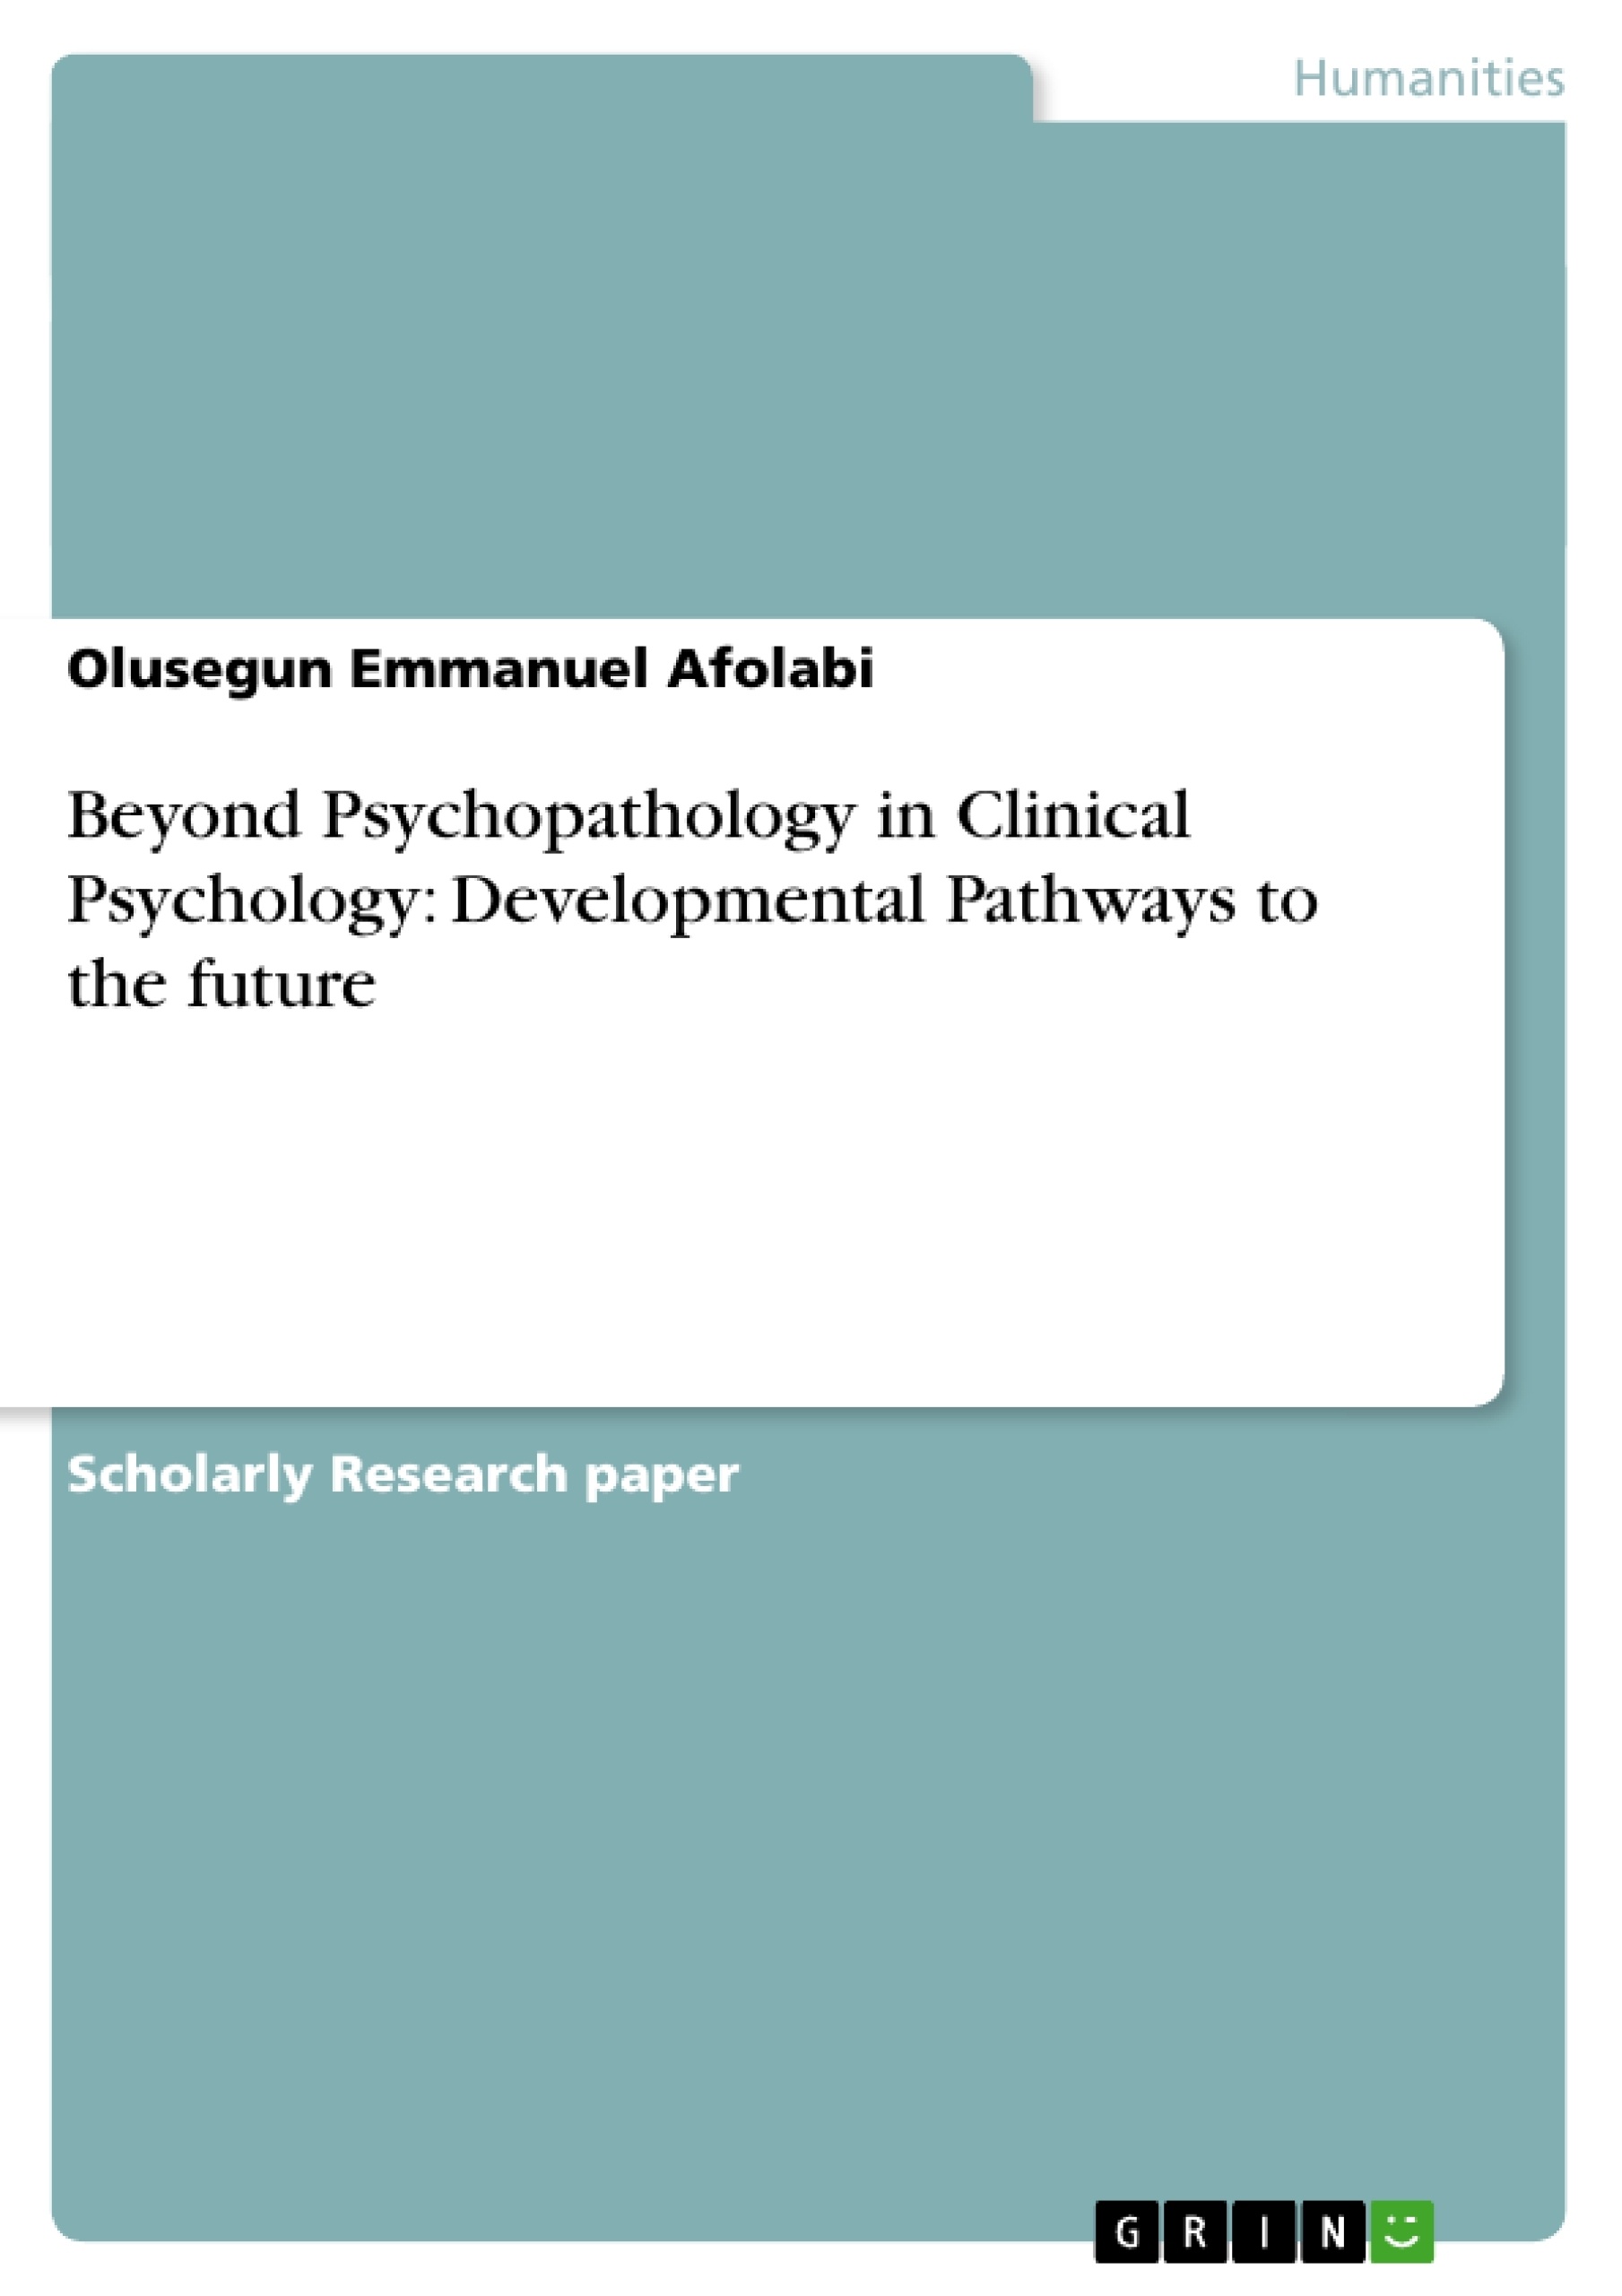 Title: Beyond Psychopathology in Clinical Psychology: Developmental Pathways to the future